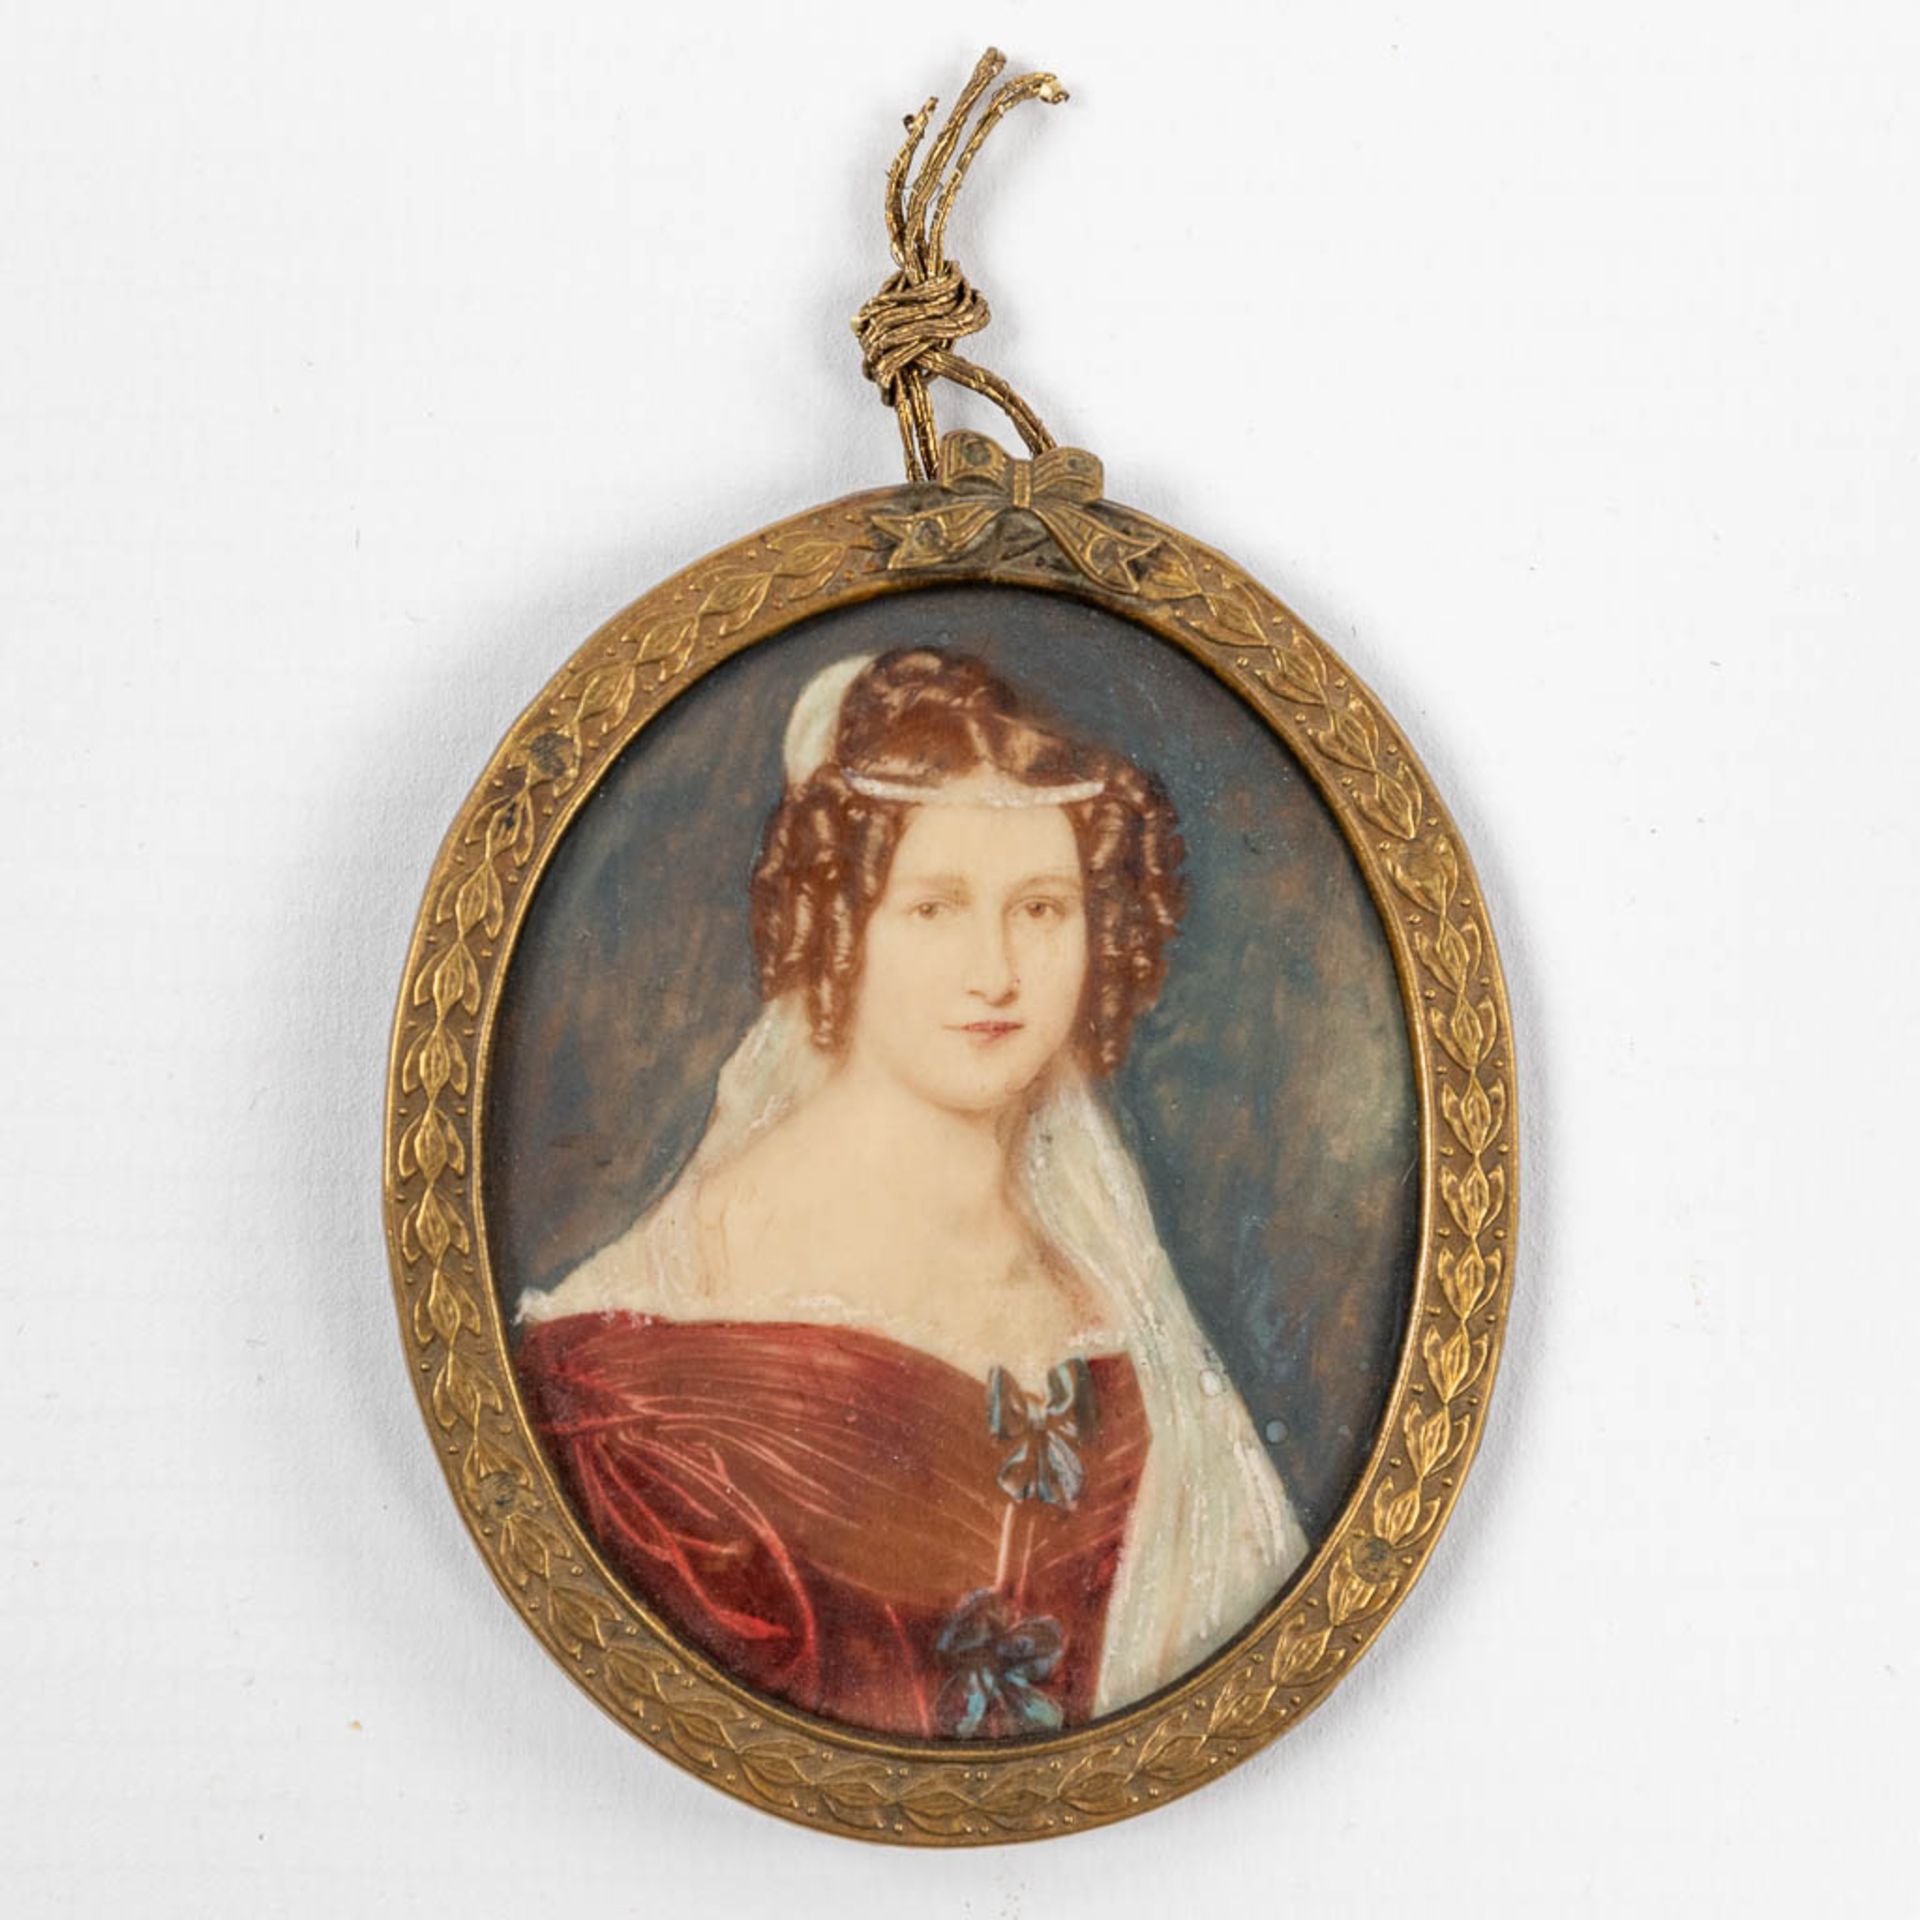 Seven miniature framed paintings, 19th C. (W:17 x H:20 cm) - Image 8 of 13